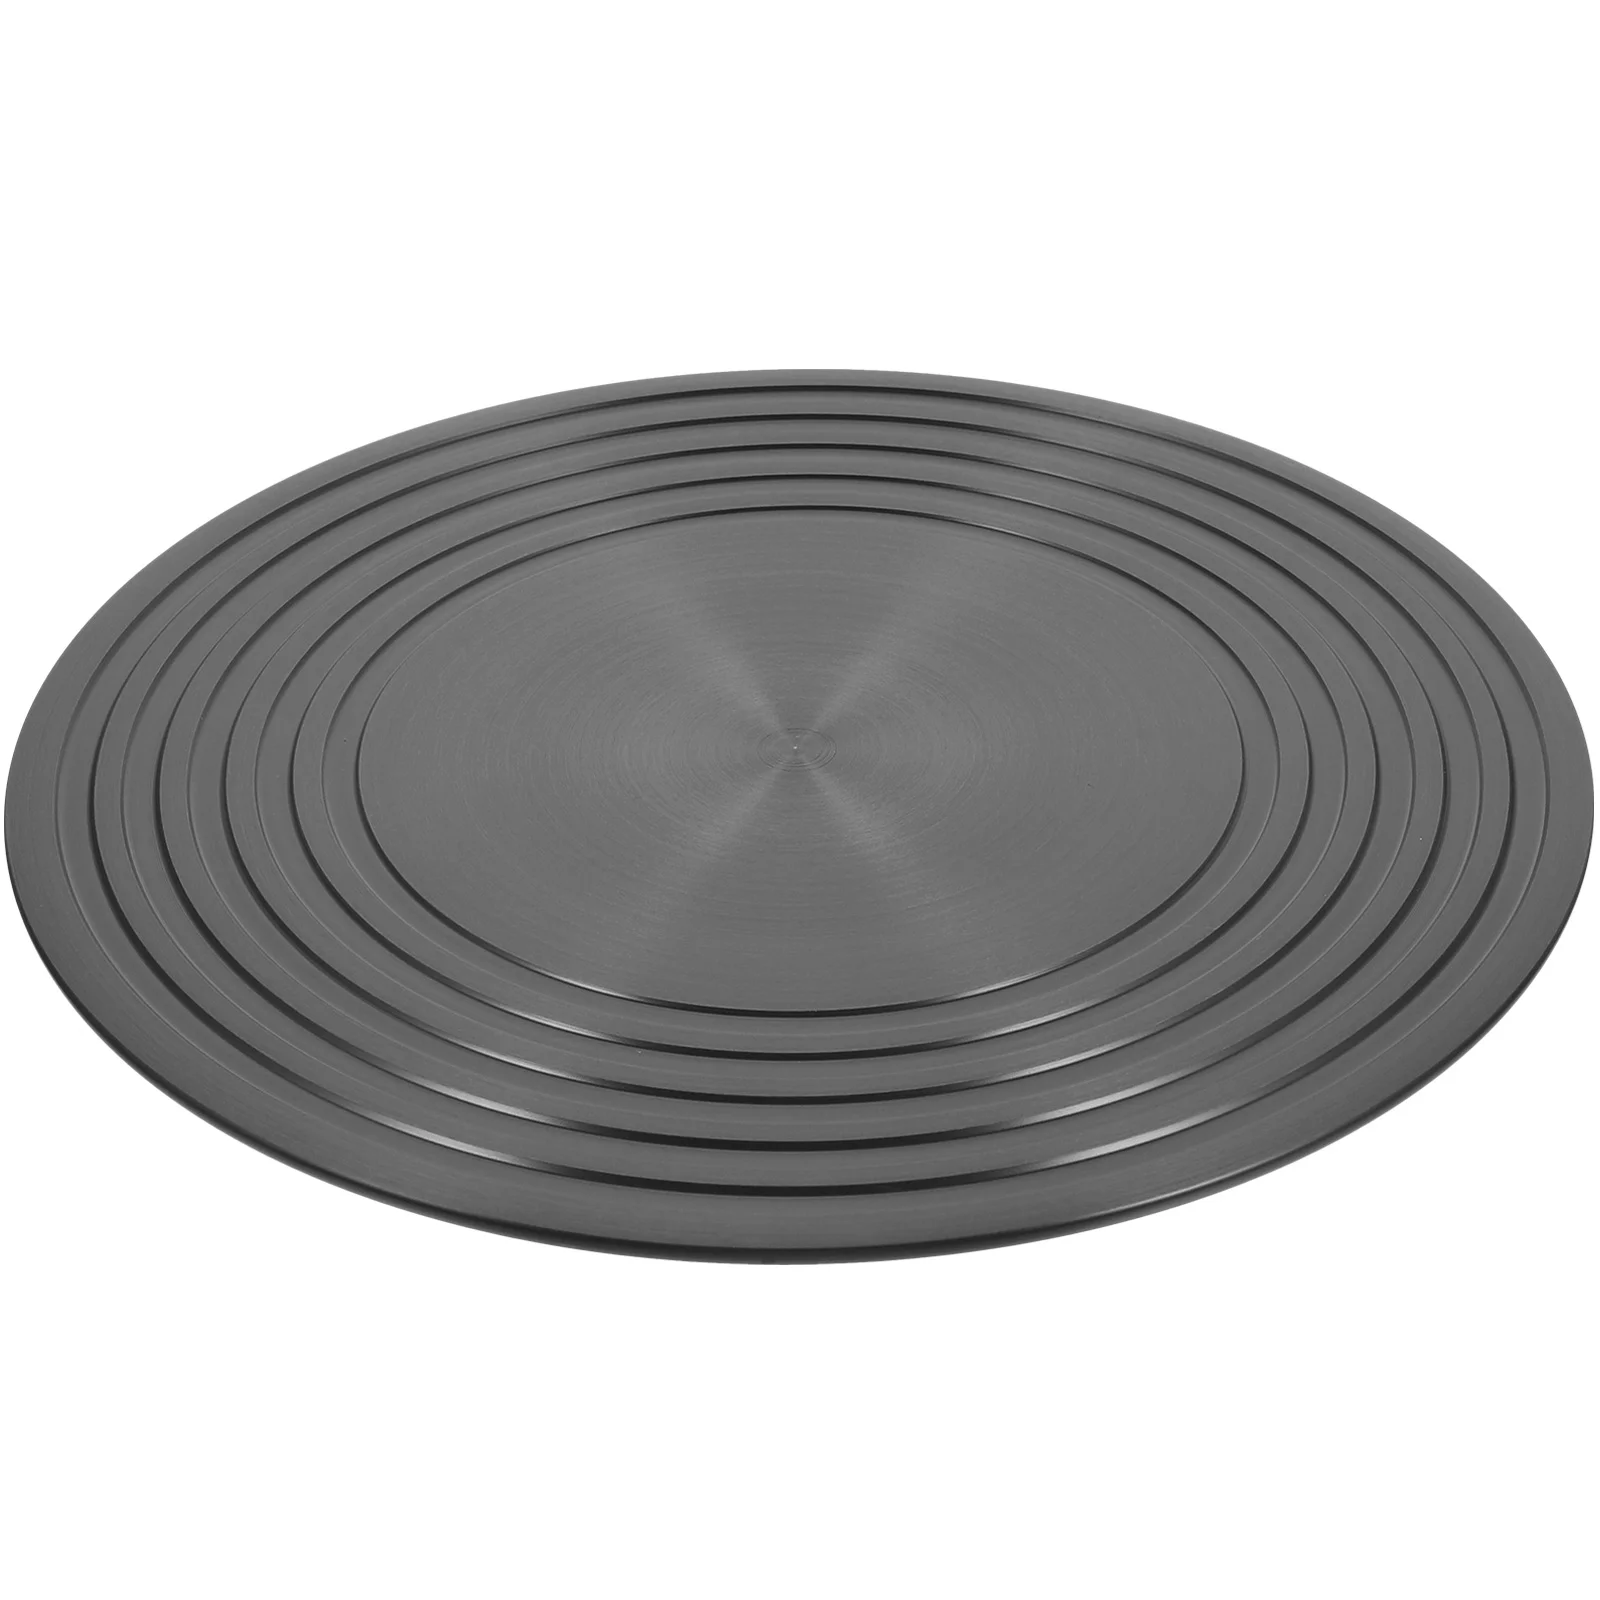 

Home Diffuser Thermal Defrost Tray Heat Round Diffusion Plate Induction Plates Aluminum Gas Stove Adapter